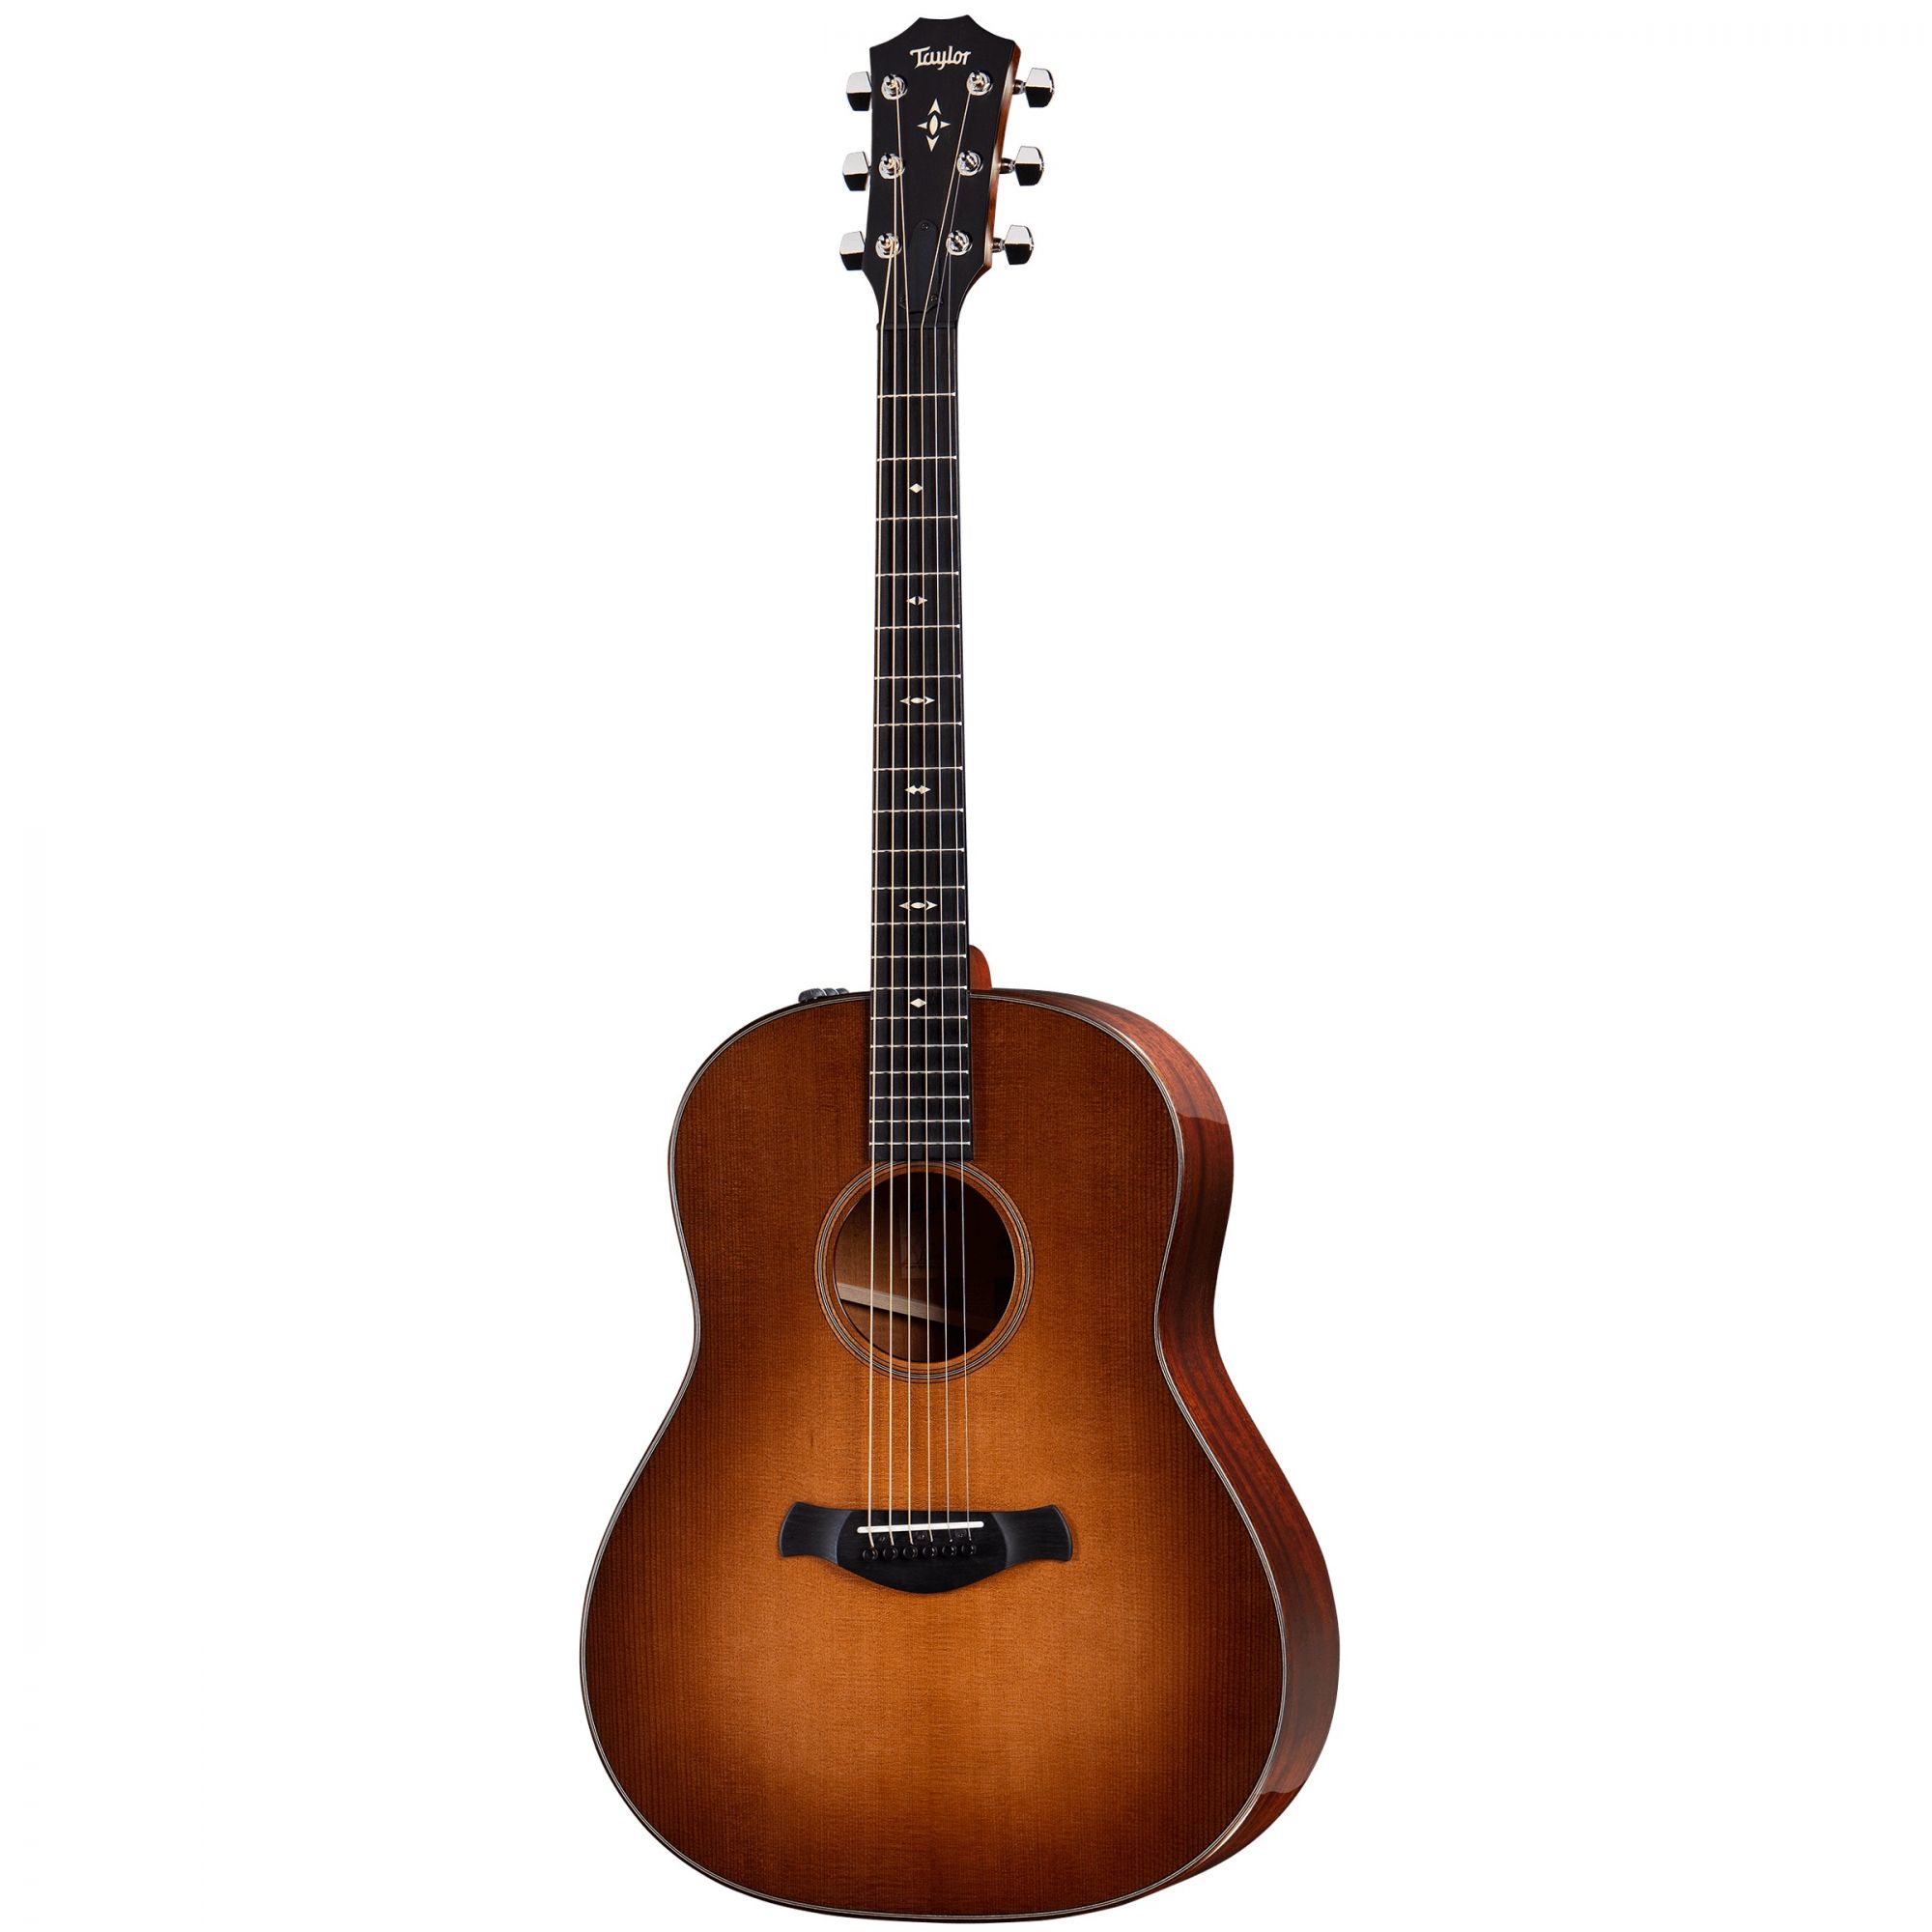 Taylor Builder's Edition 517e Grand Pacific Electro Acoustic Guitar